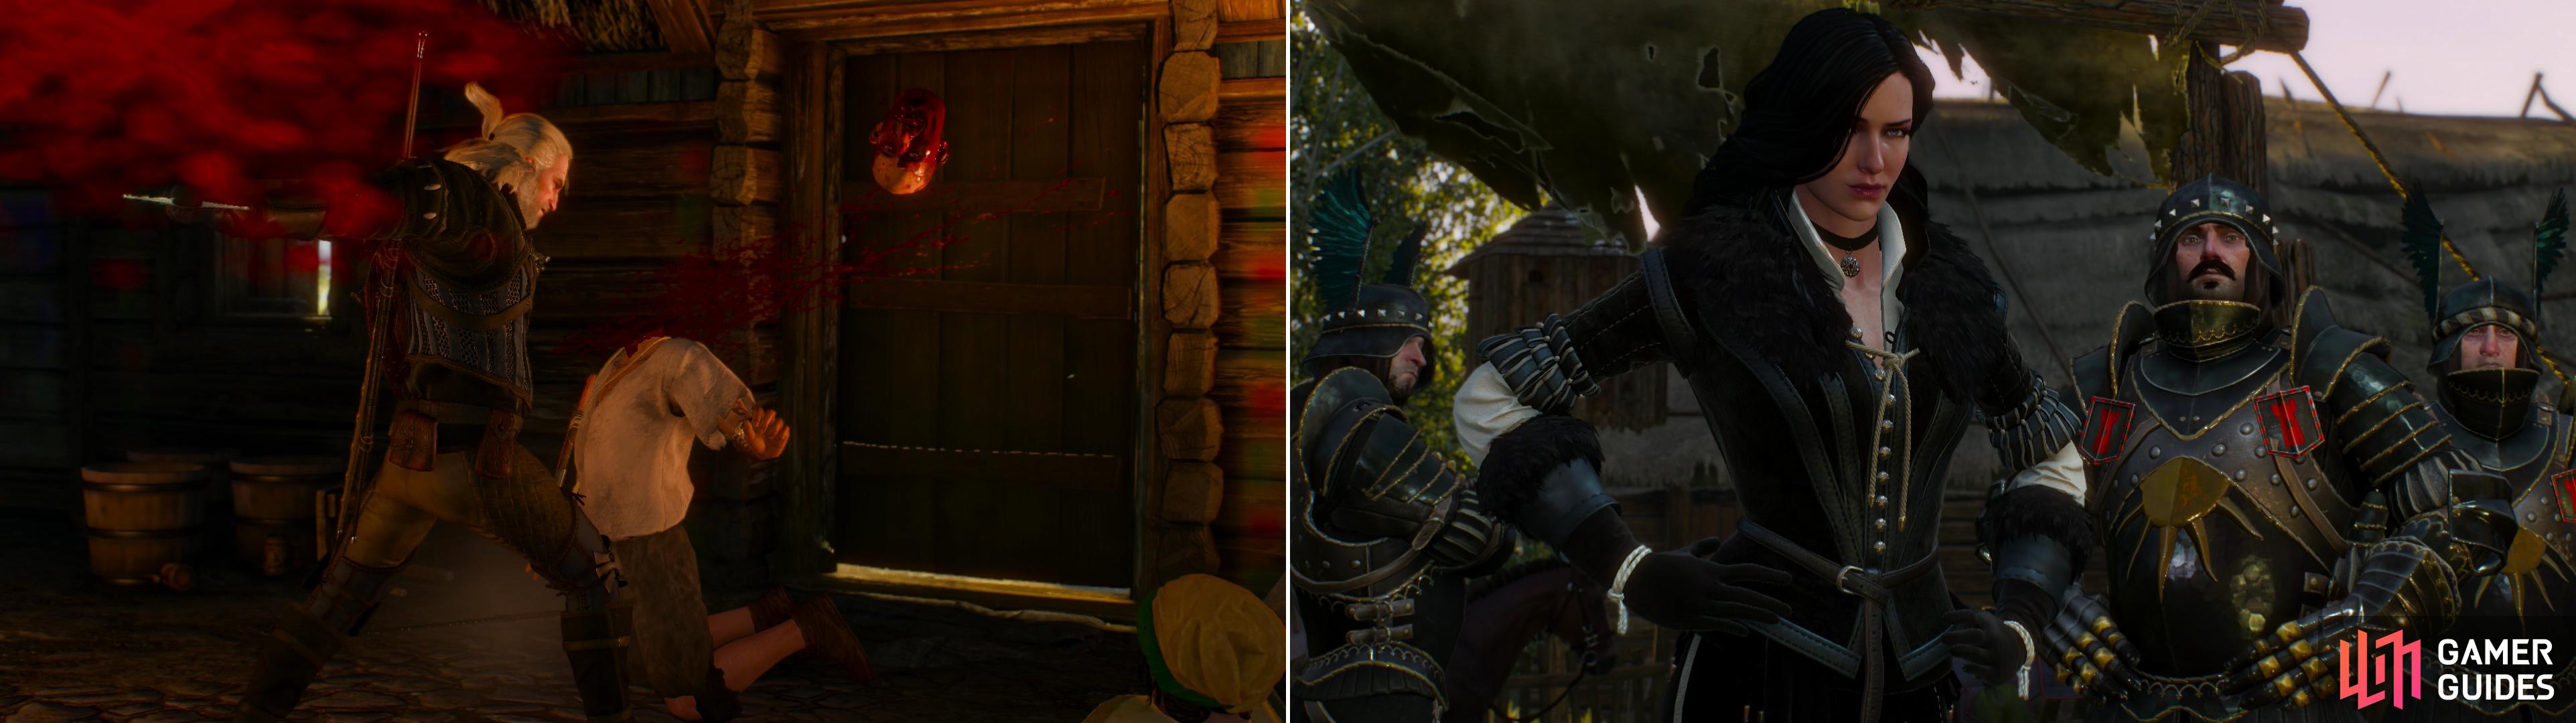 Geralt and Vesemir respond to the escalating violence in the tavern with brutal efficiency (left). Fortunately they are met by Yennefer afterwards and escorted to Vizima (right).